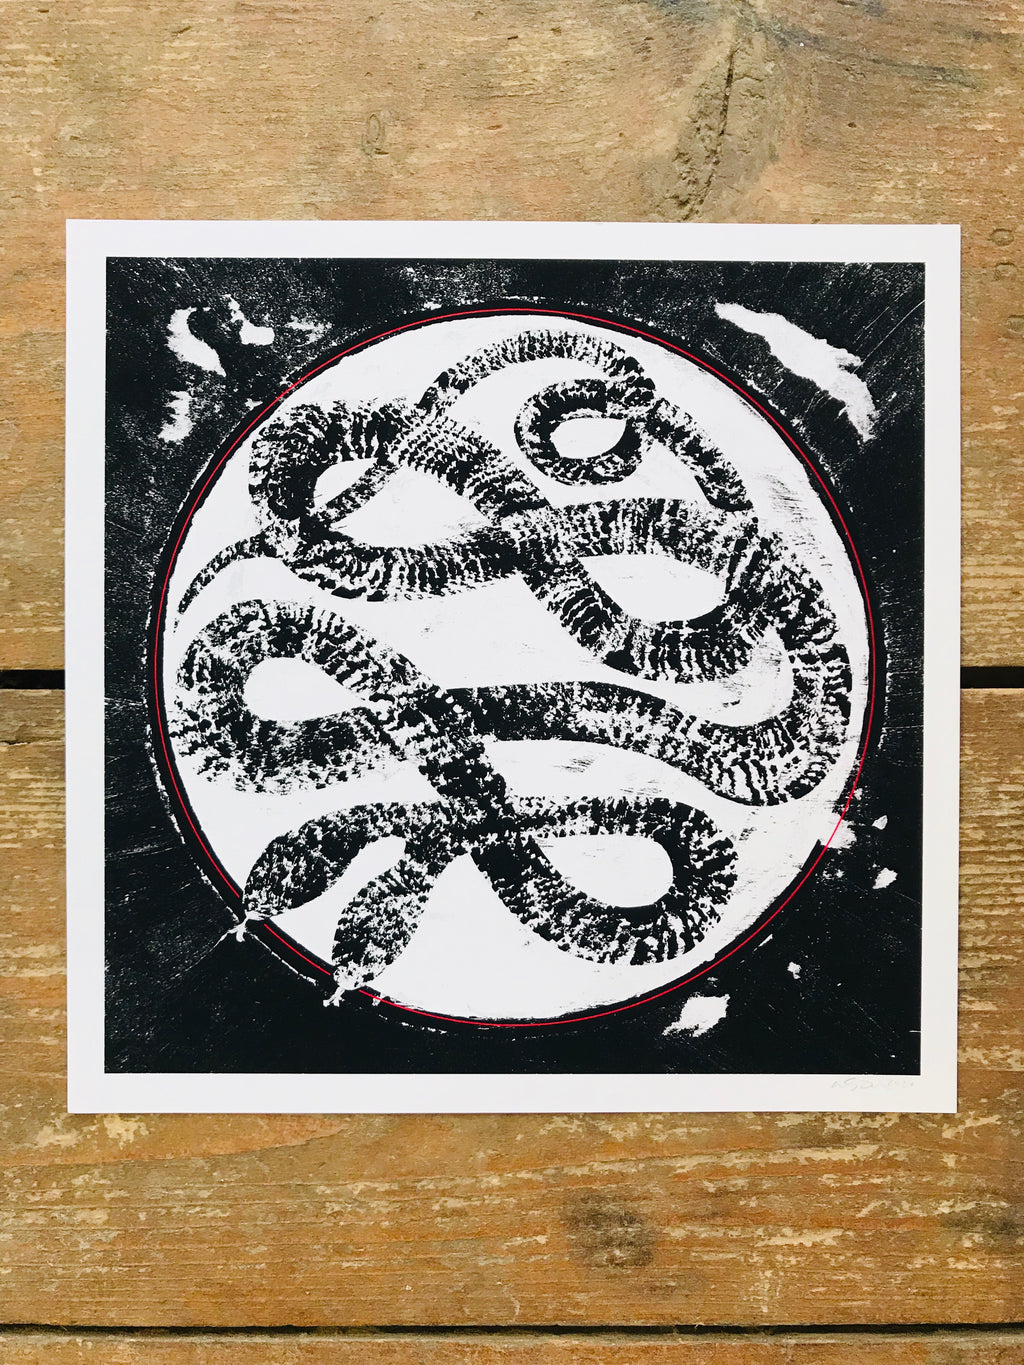 Two Headed Snake 8x8in Giclee Print